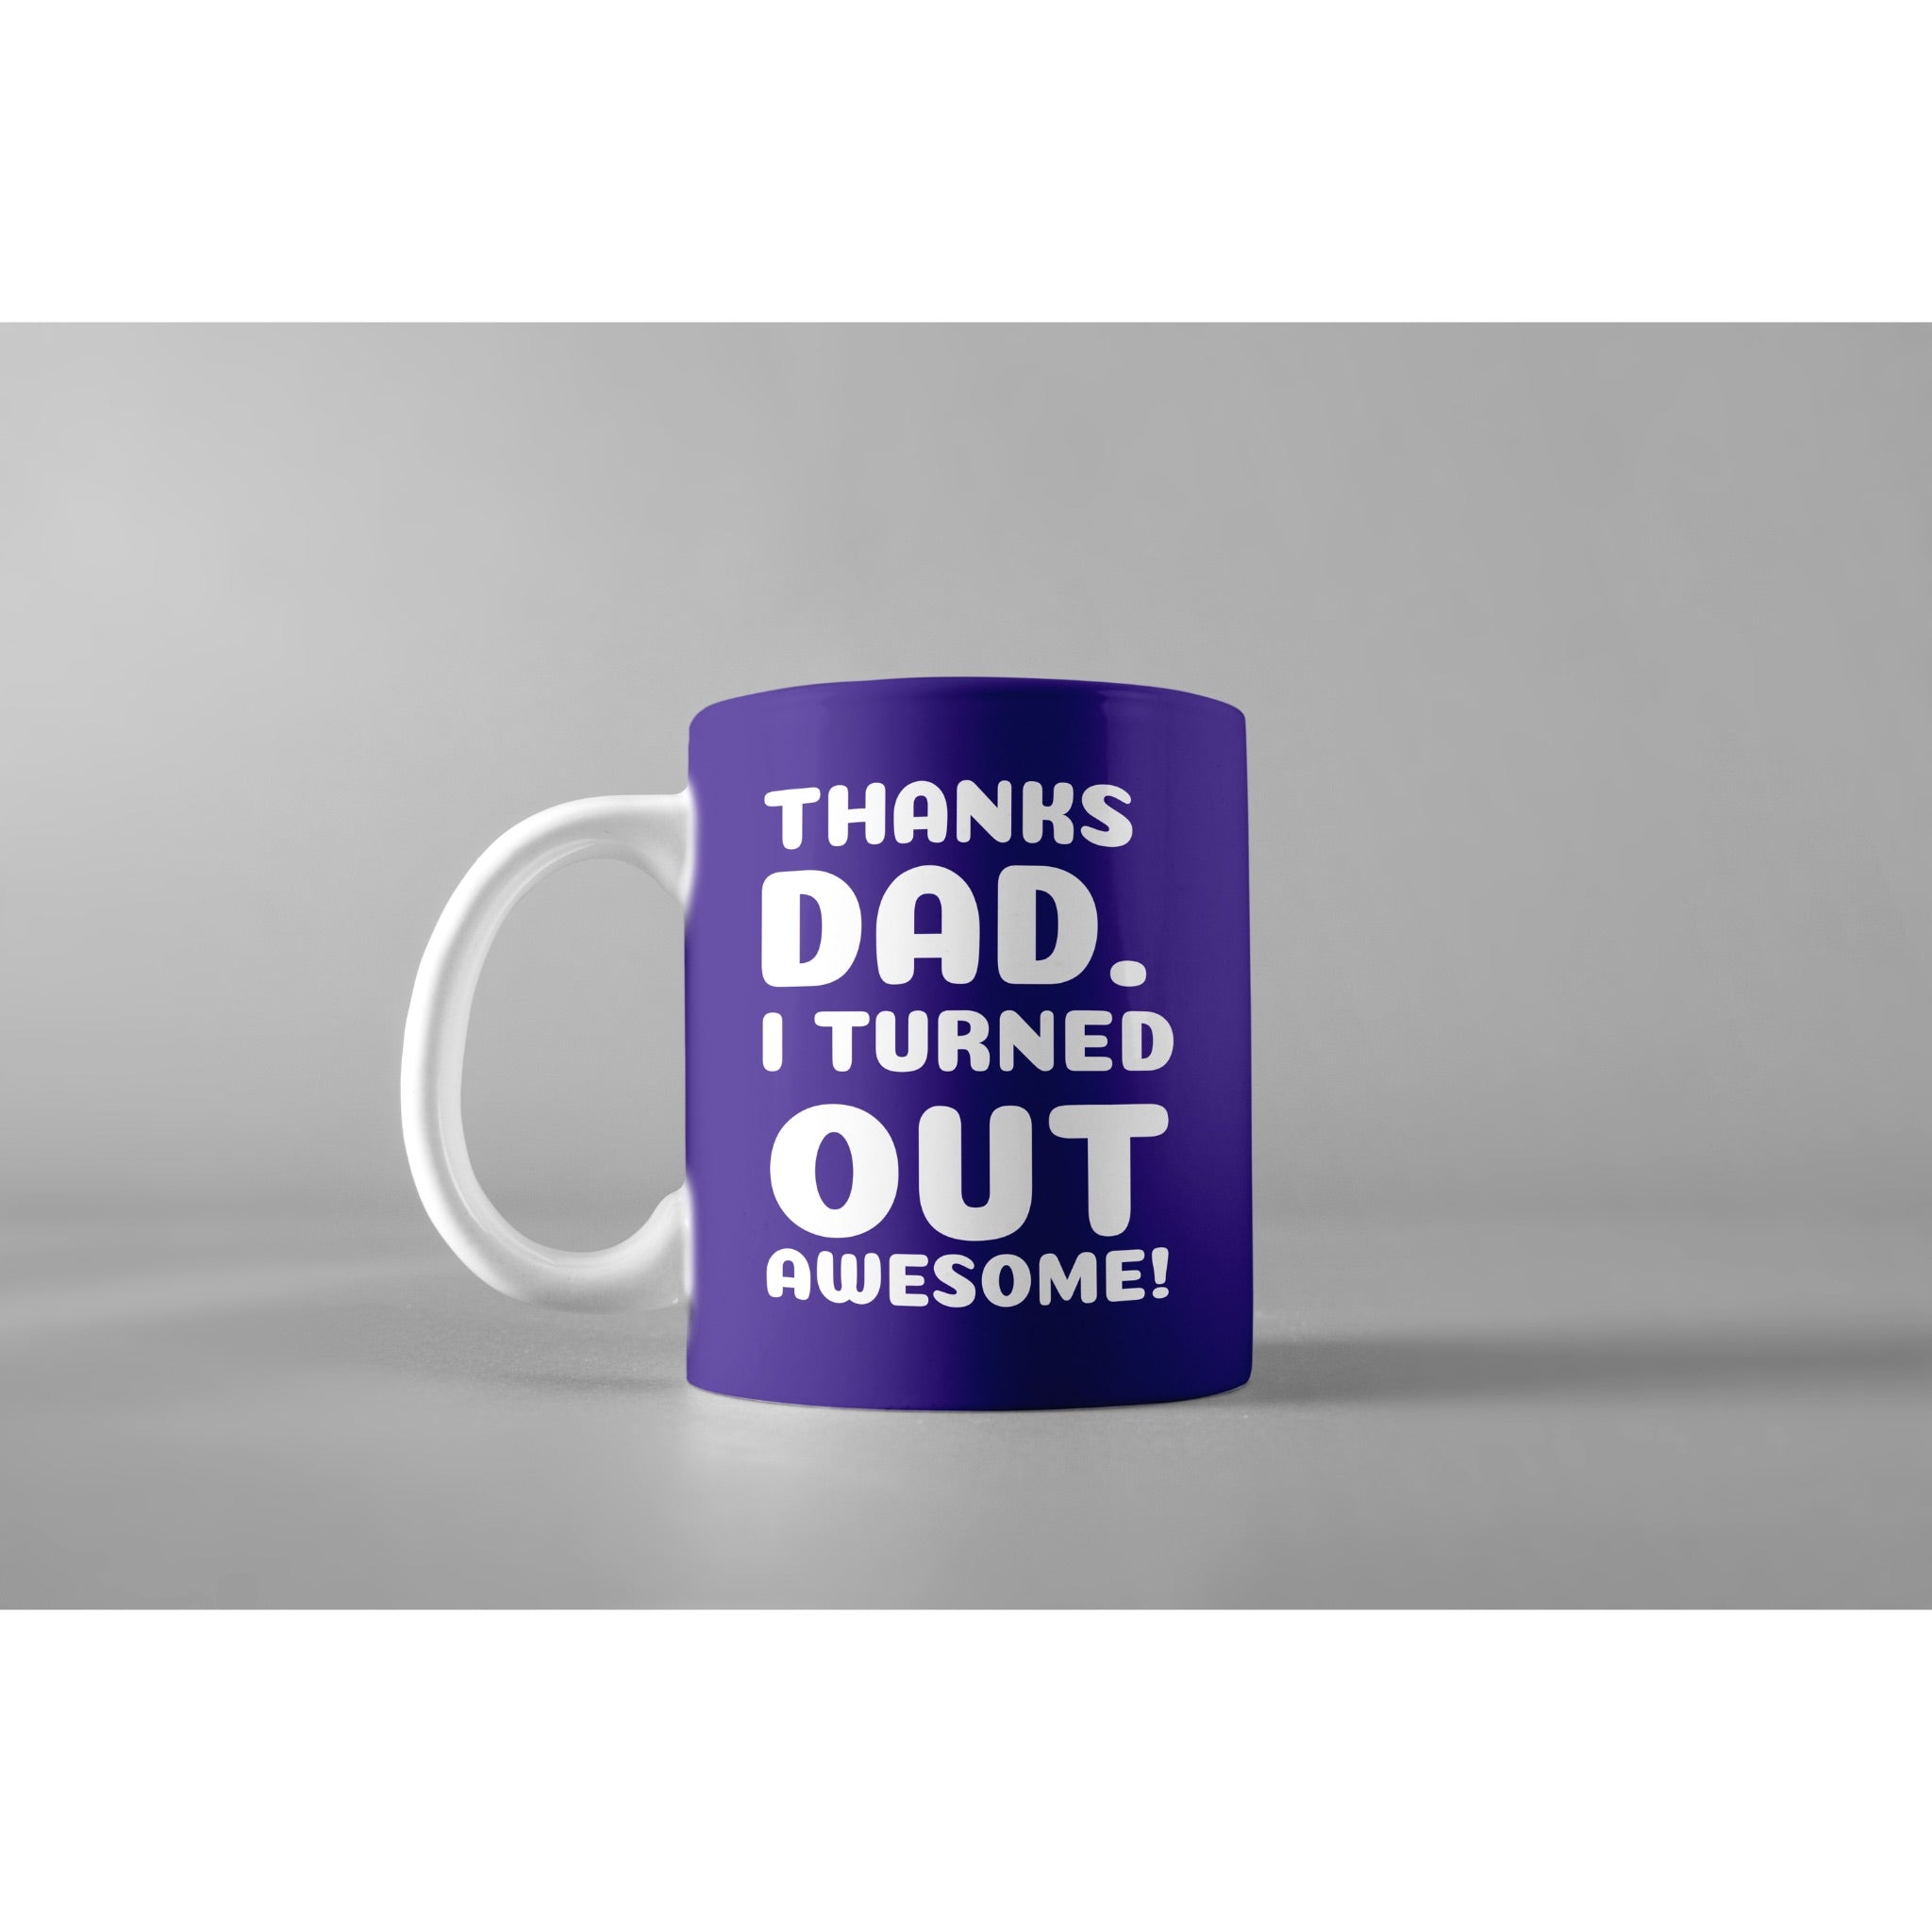 Turned out Awesome- Mugs for Father